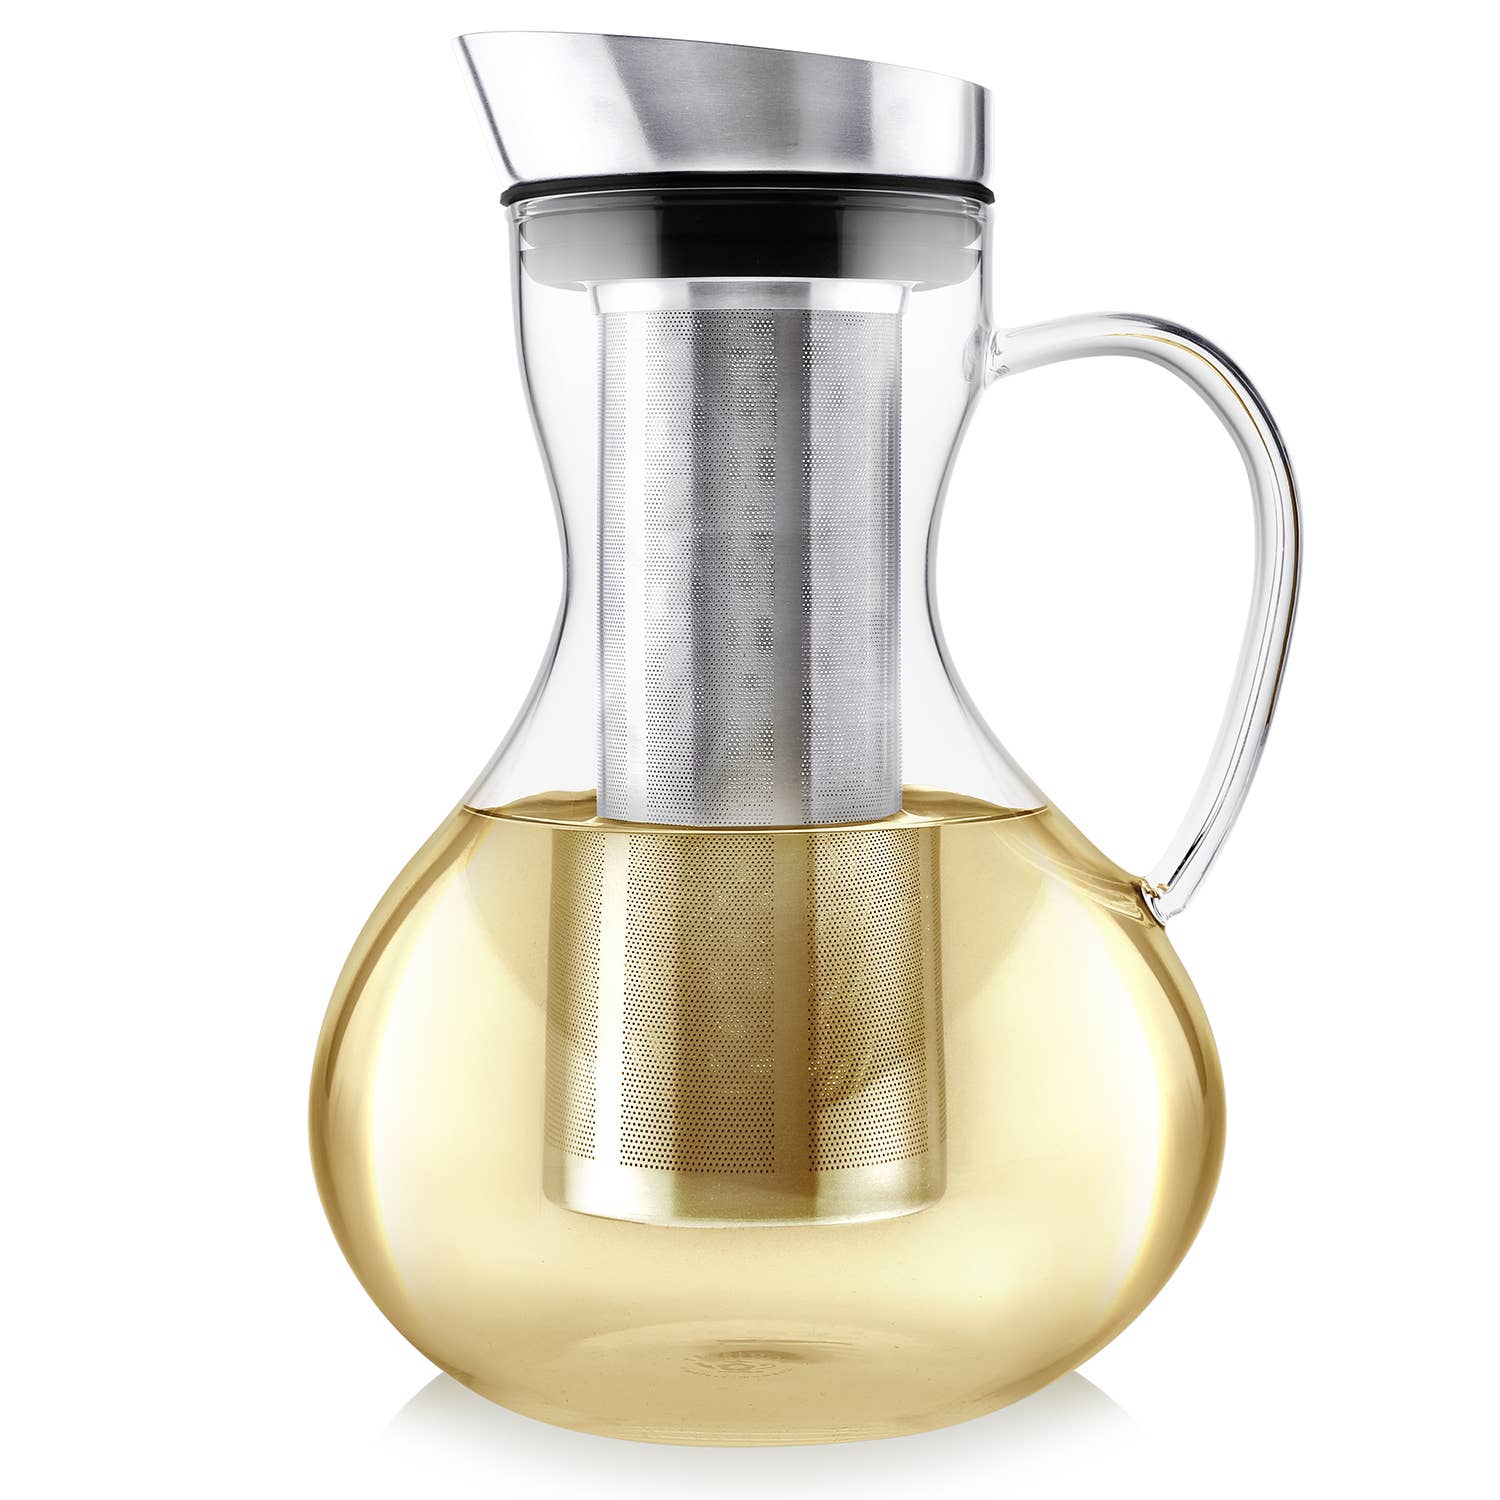 How to Brew Tea with a Glass Teapot